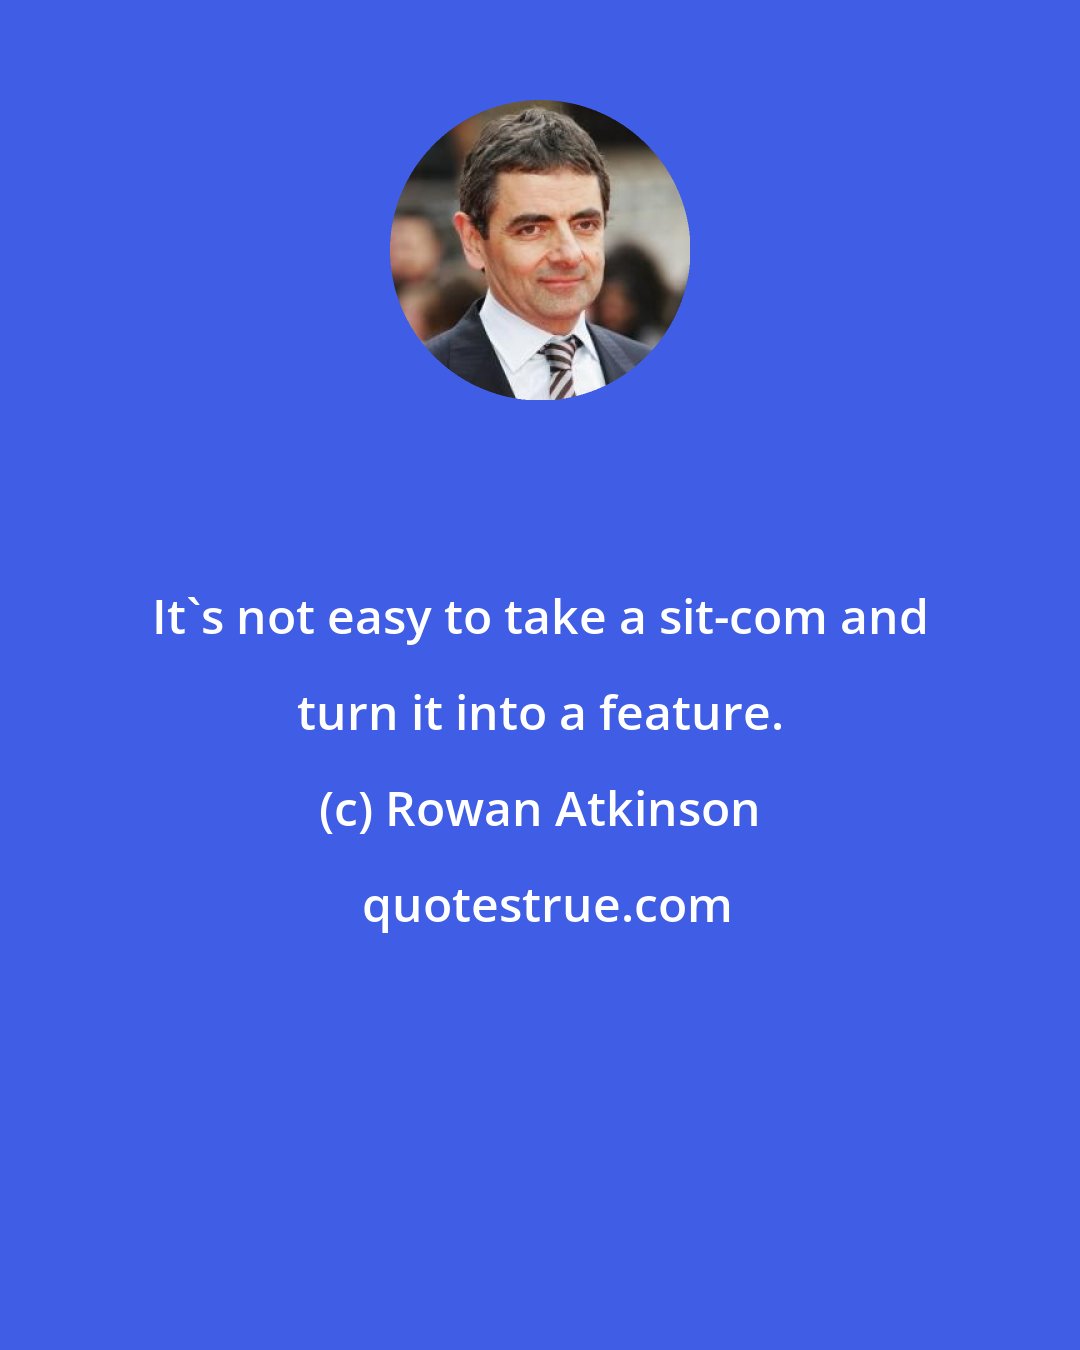 Rowan Atkinson: It's not easy to take a sit-com and turn it into a feature.